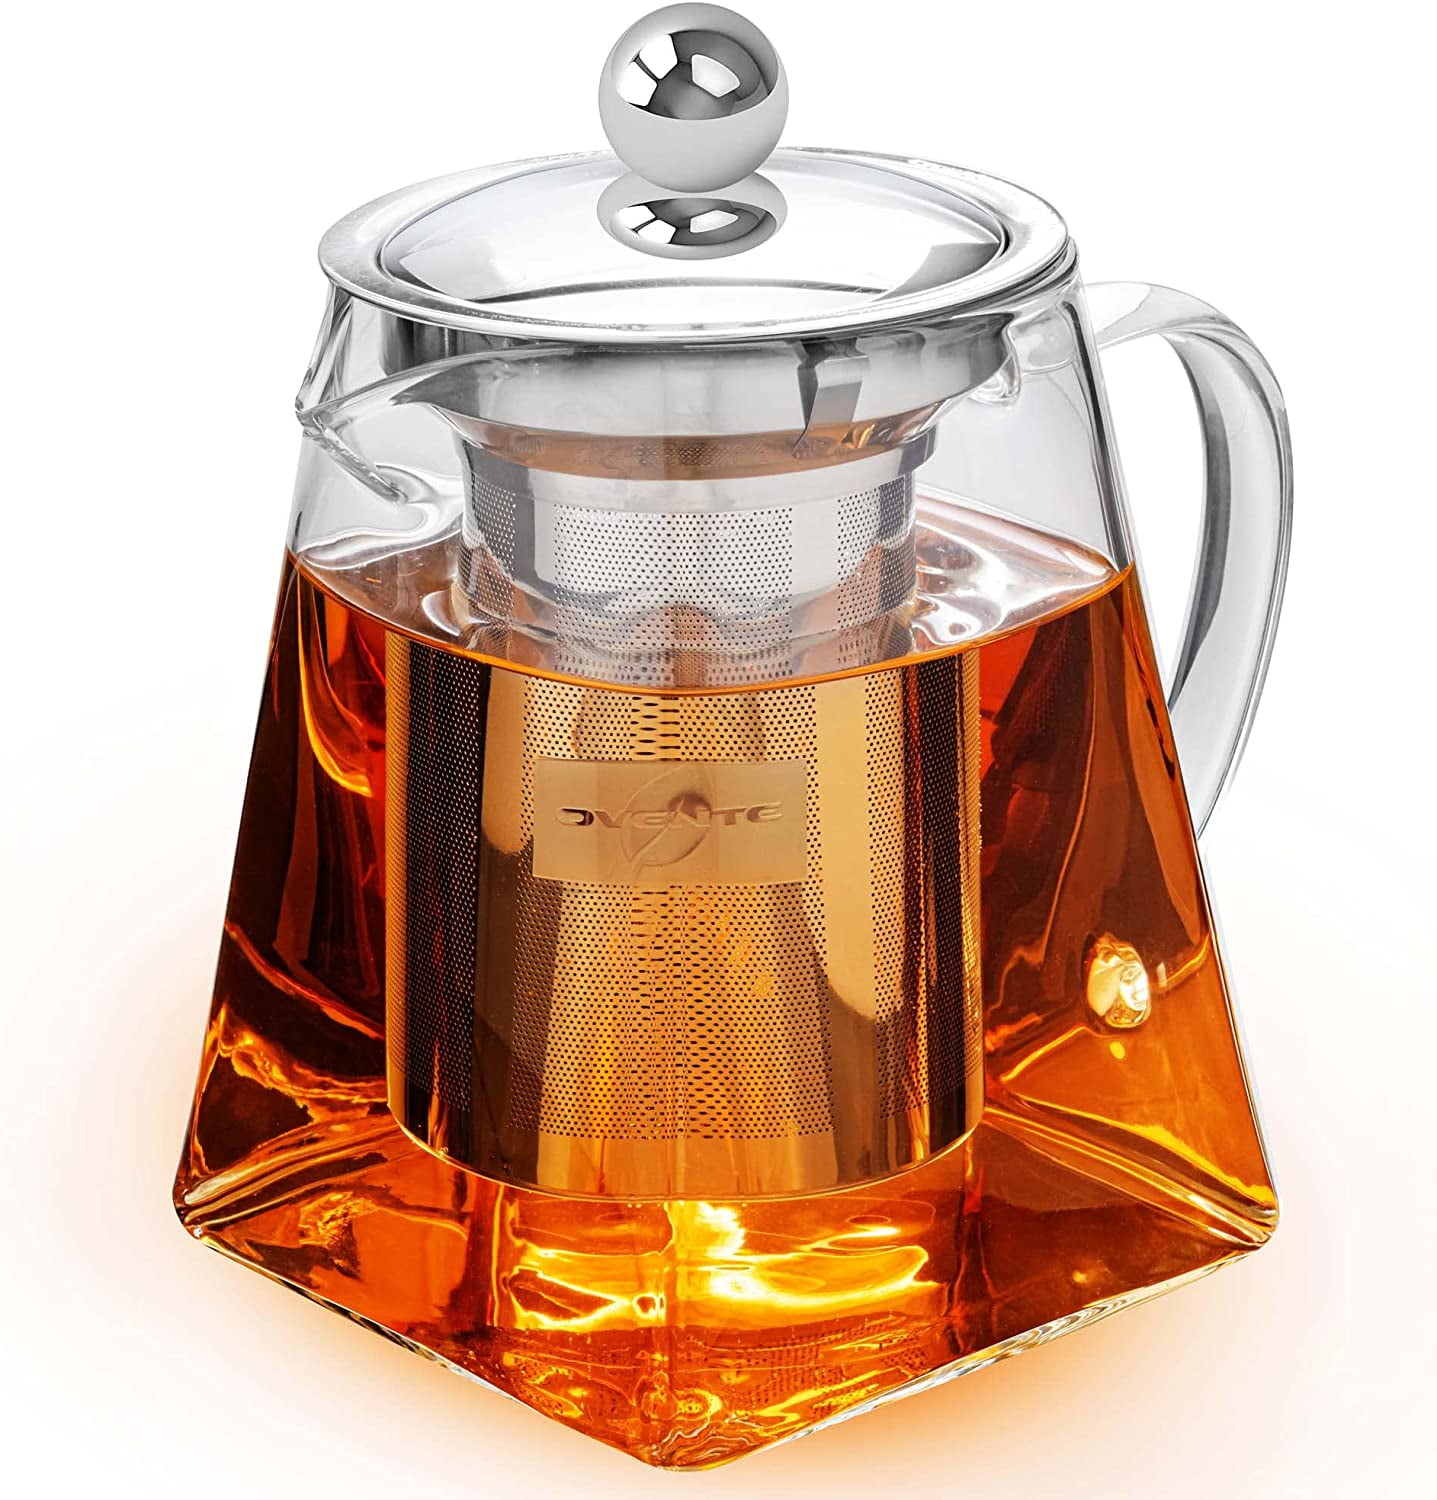 Ovente Glass Tea Kettle 27oz, With Tea Infuser for Loose-Leaf Tea,  Compatible With KG612S (FGK27B)